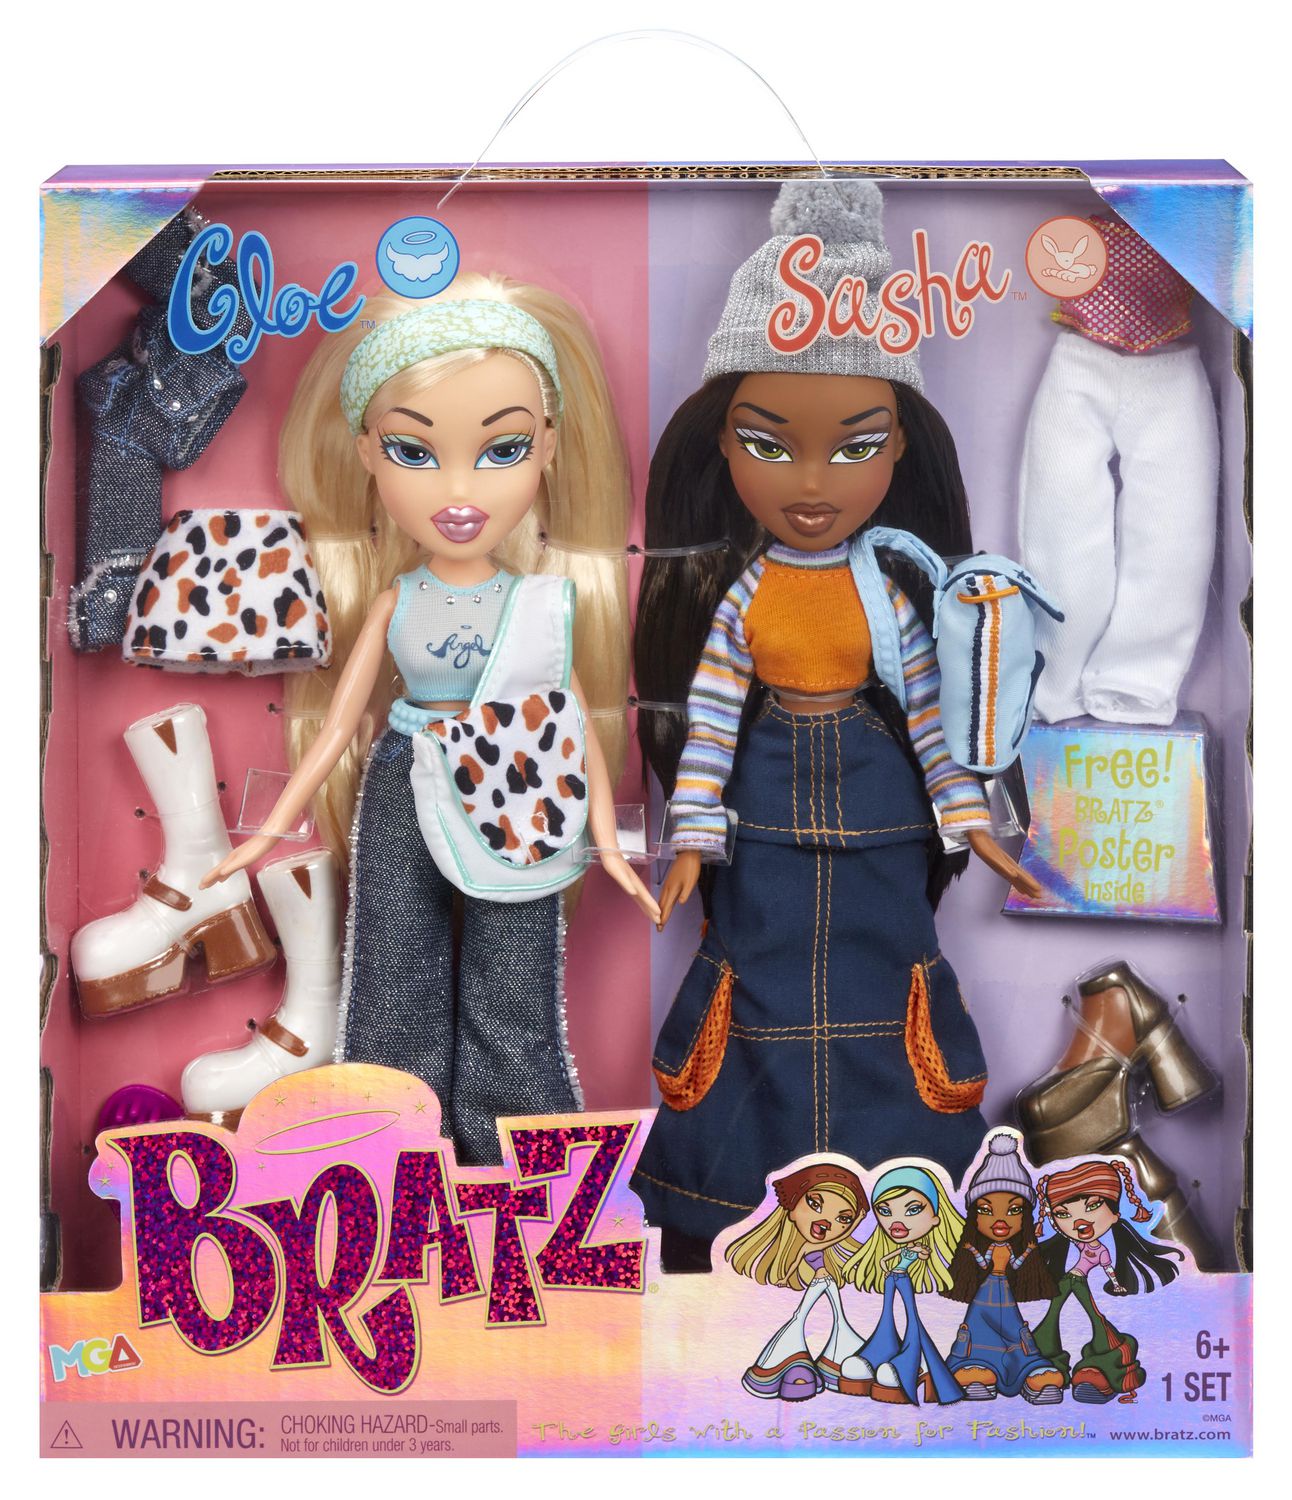 Download free Nature Lover Bratz Aesthetic Doll Wallpaper